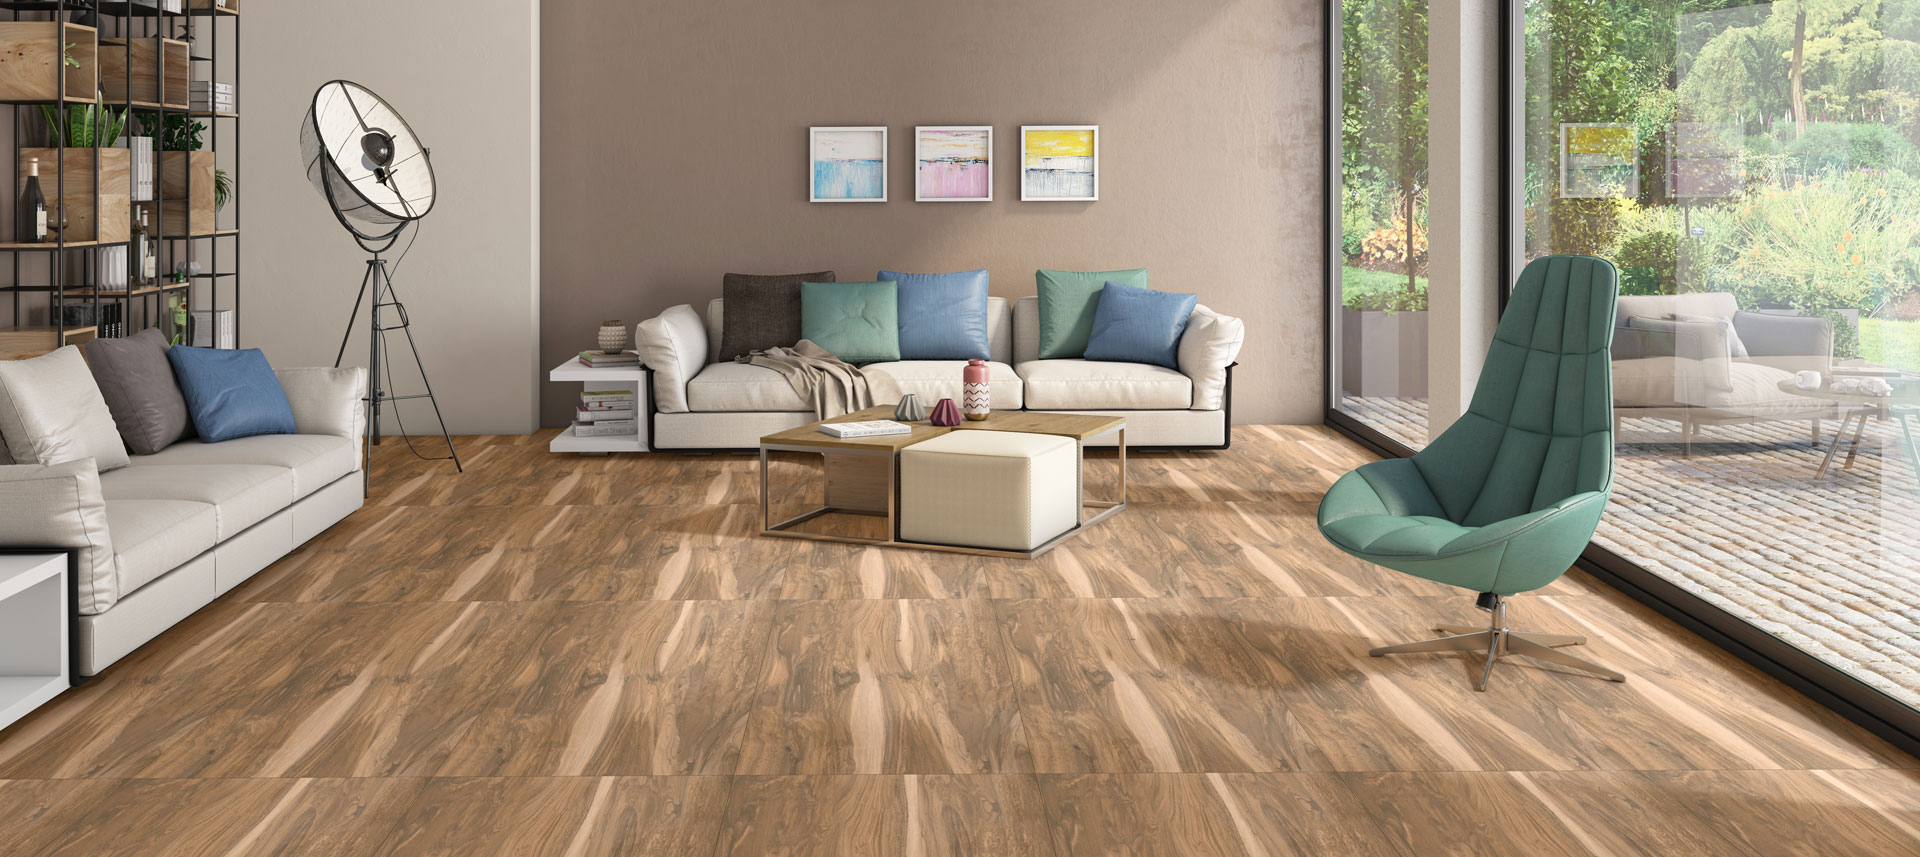 Best Floor Tiles For Living Room Design Collection | Graystone Ceramic